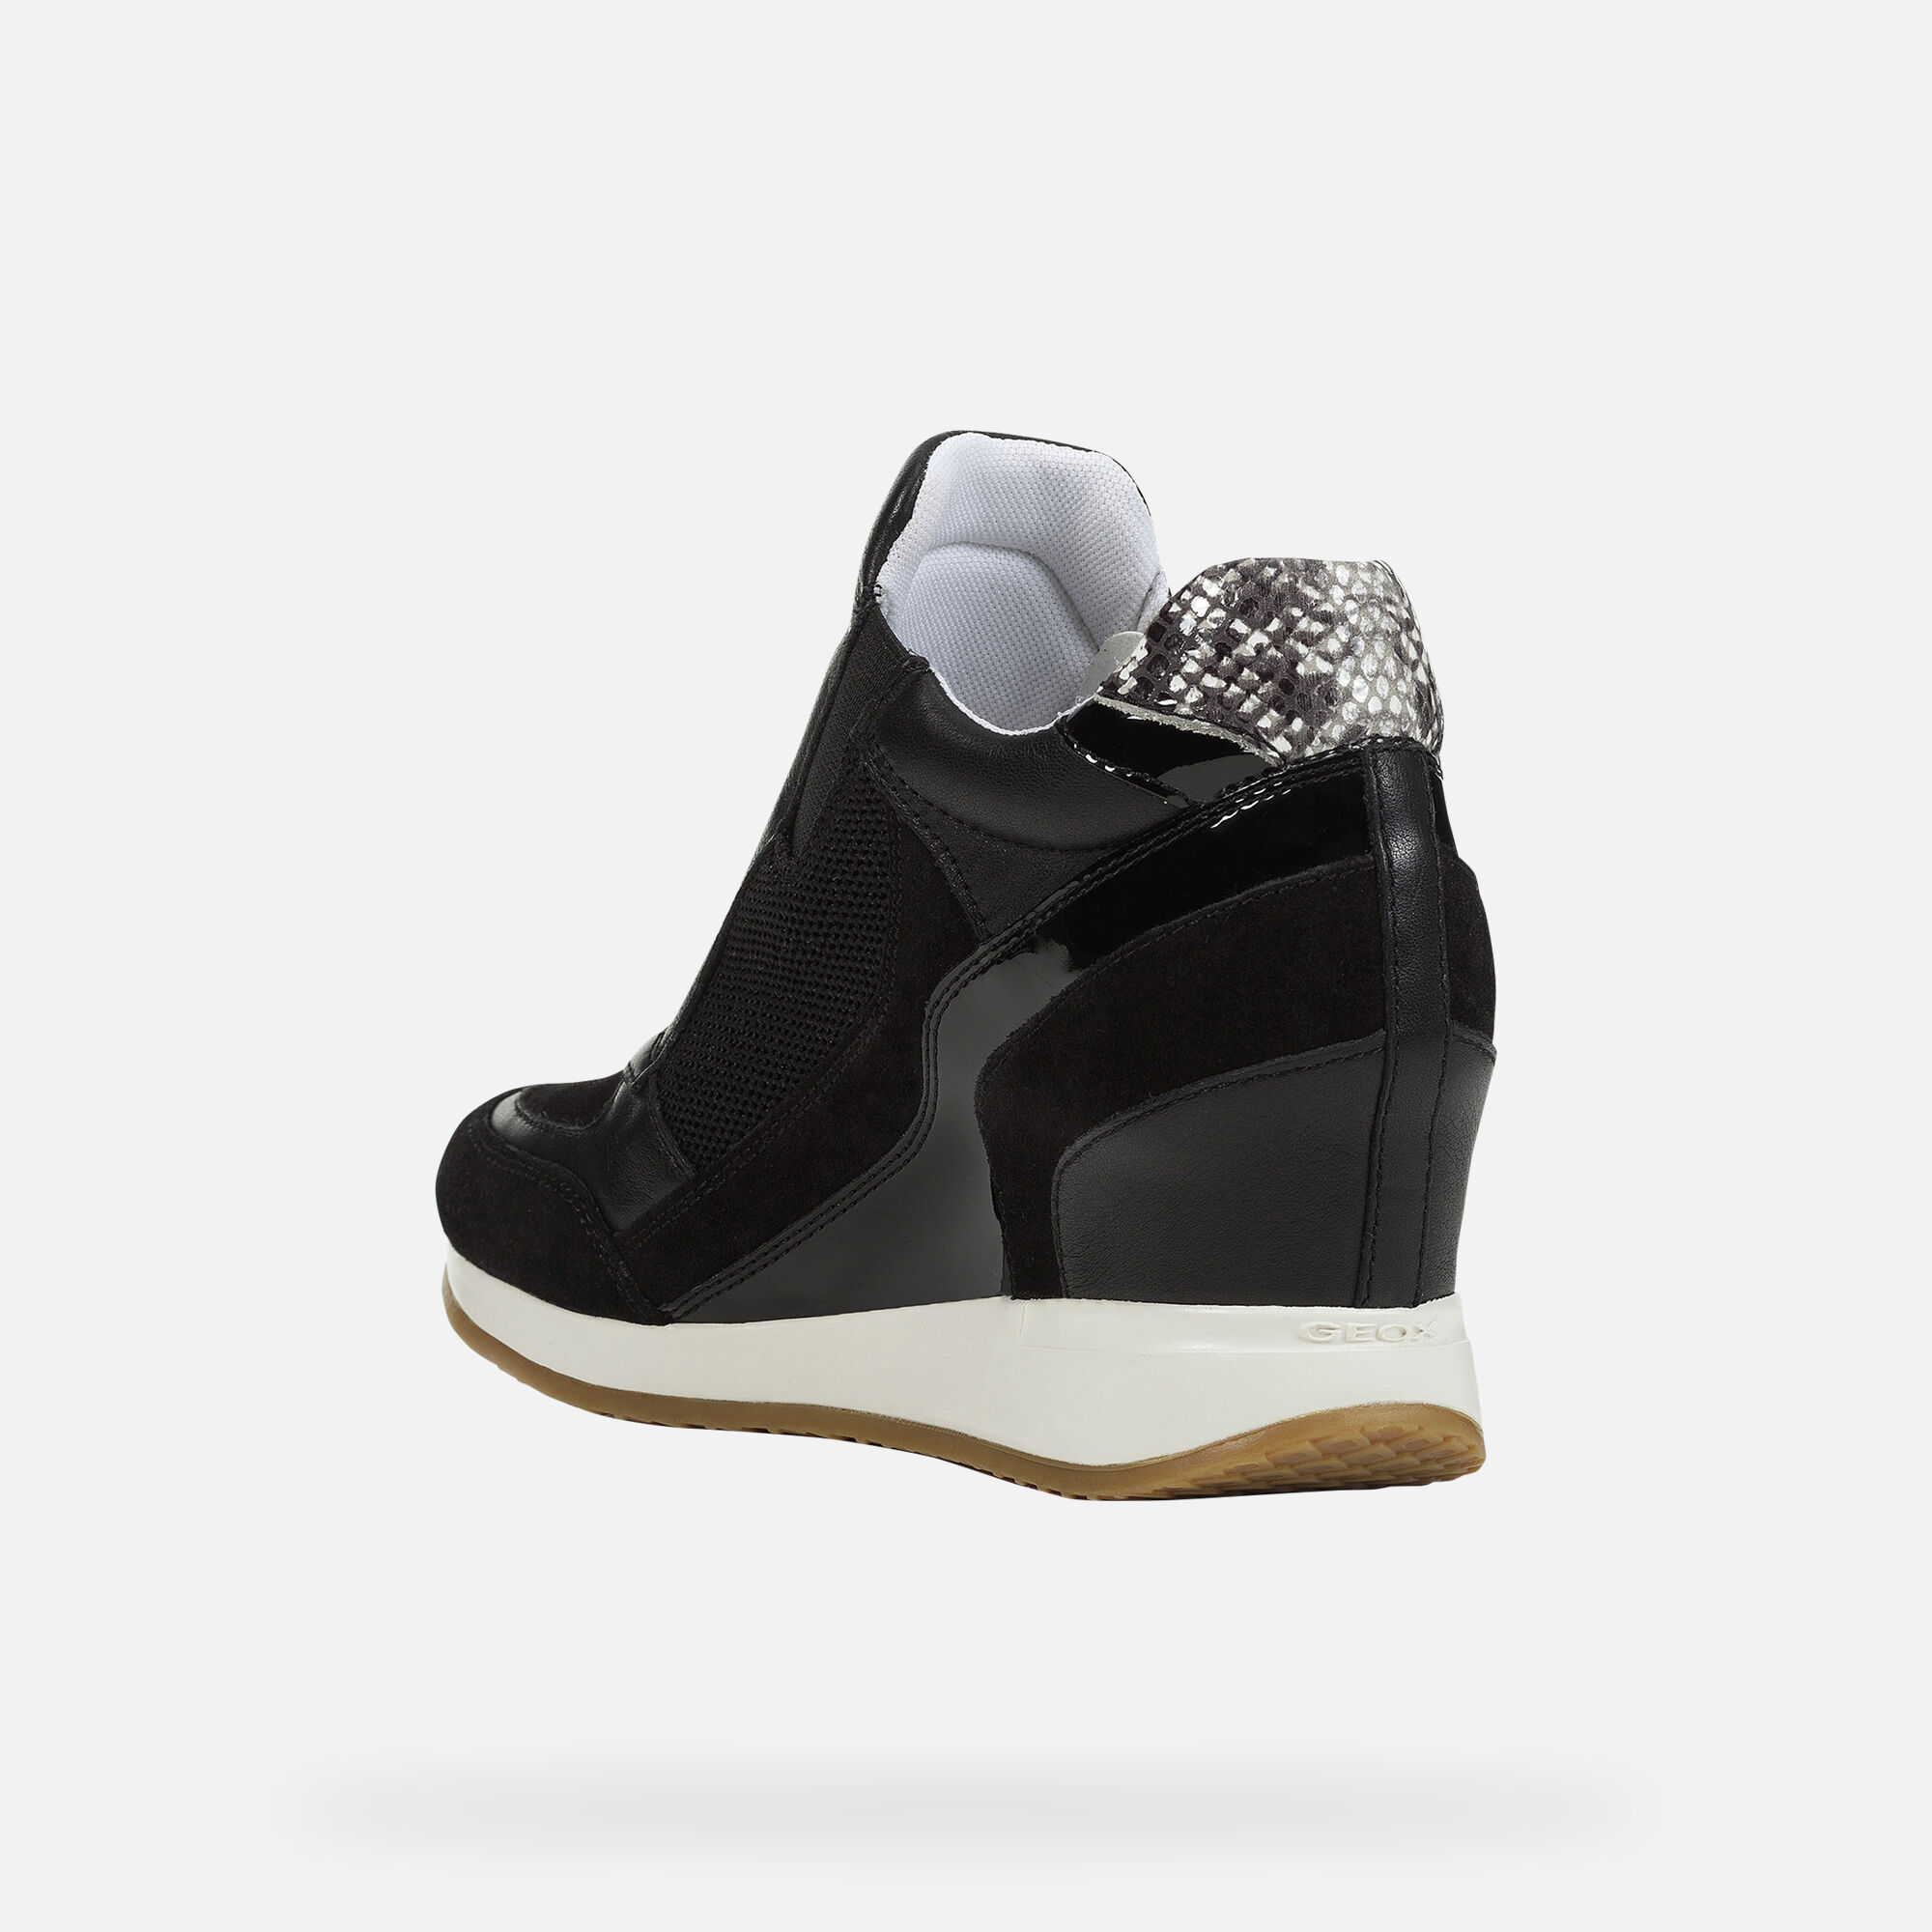 geox nydame wedge